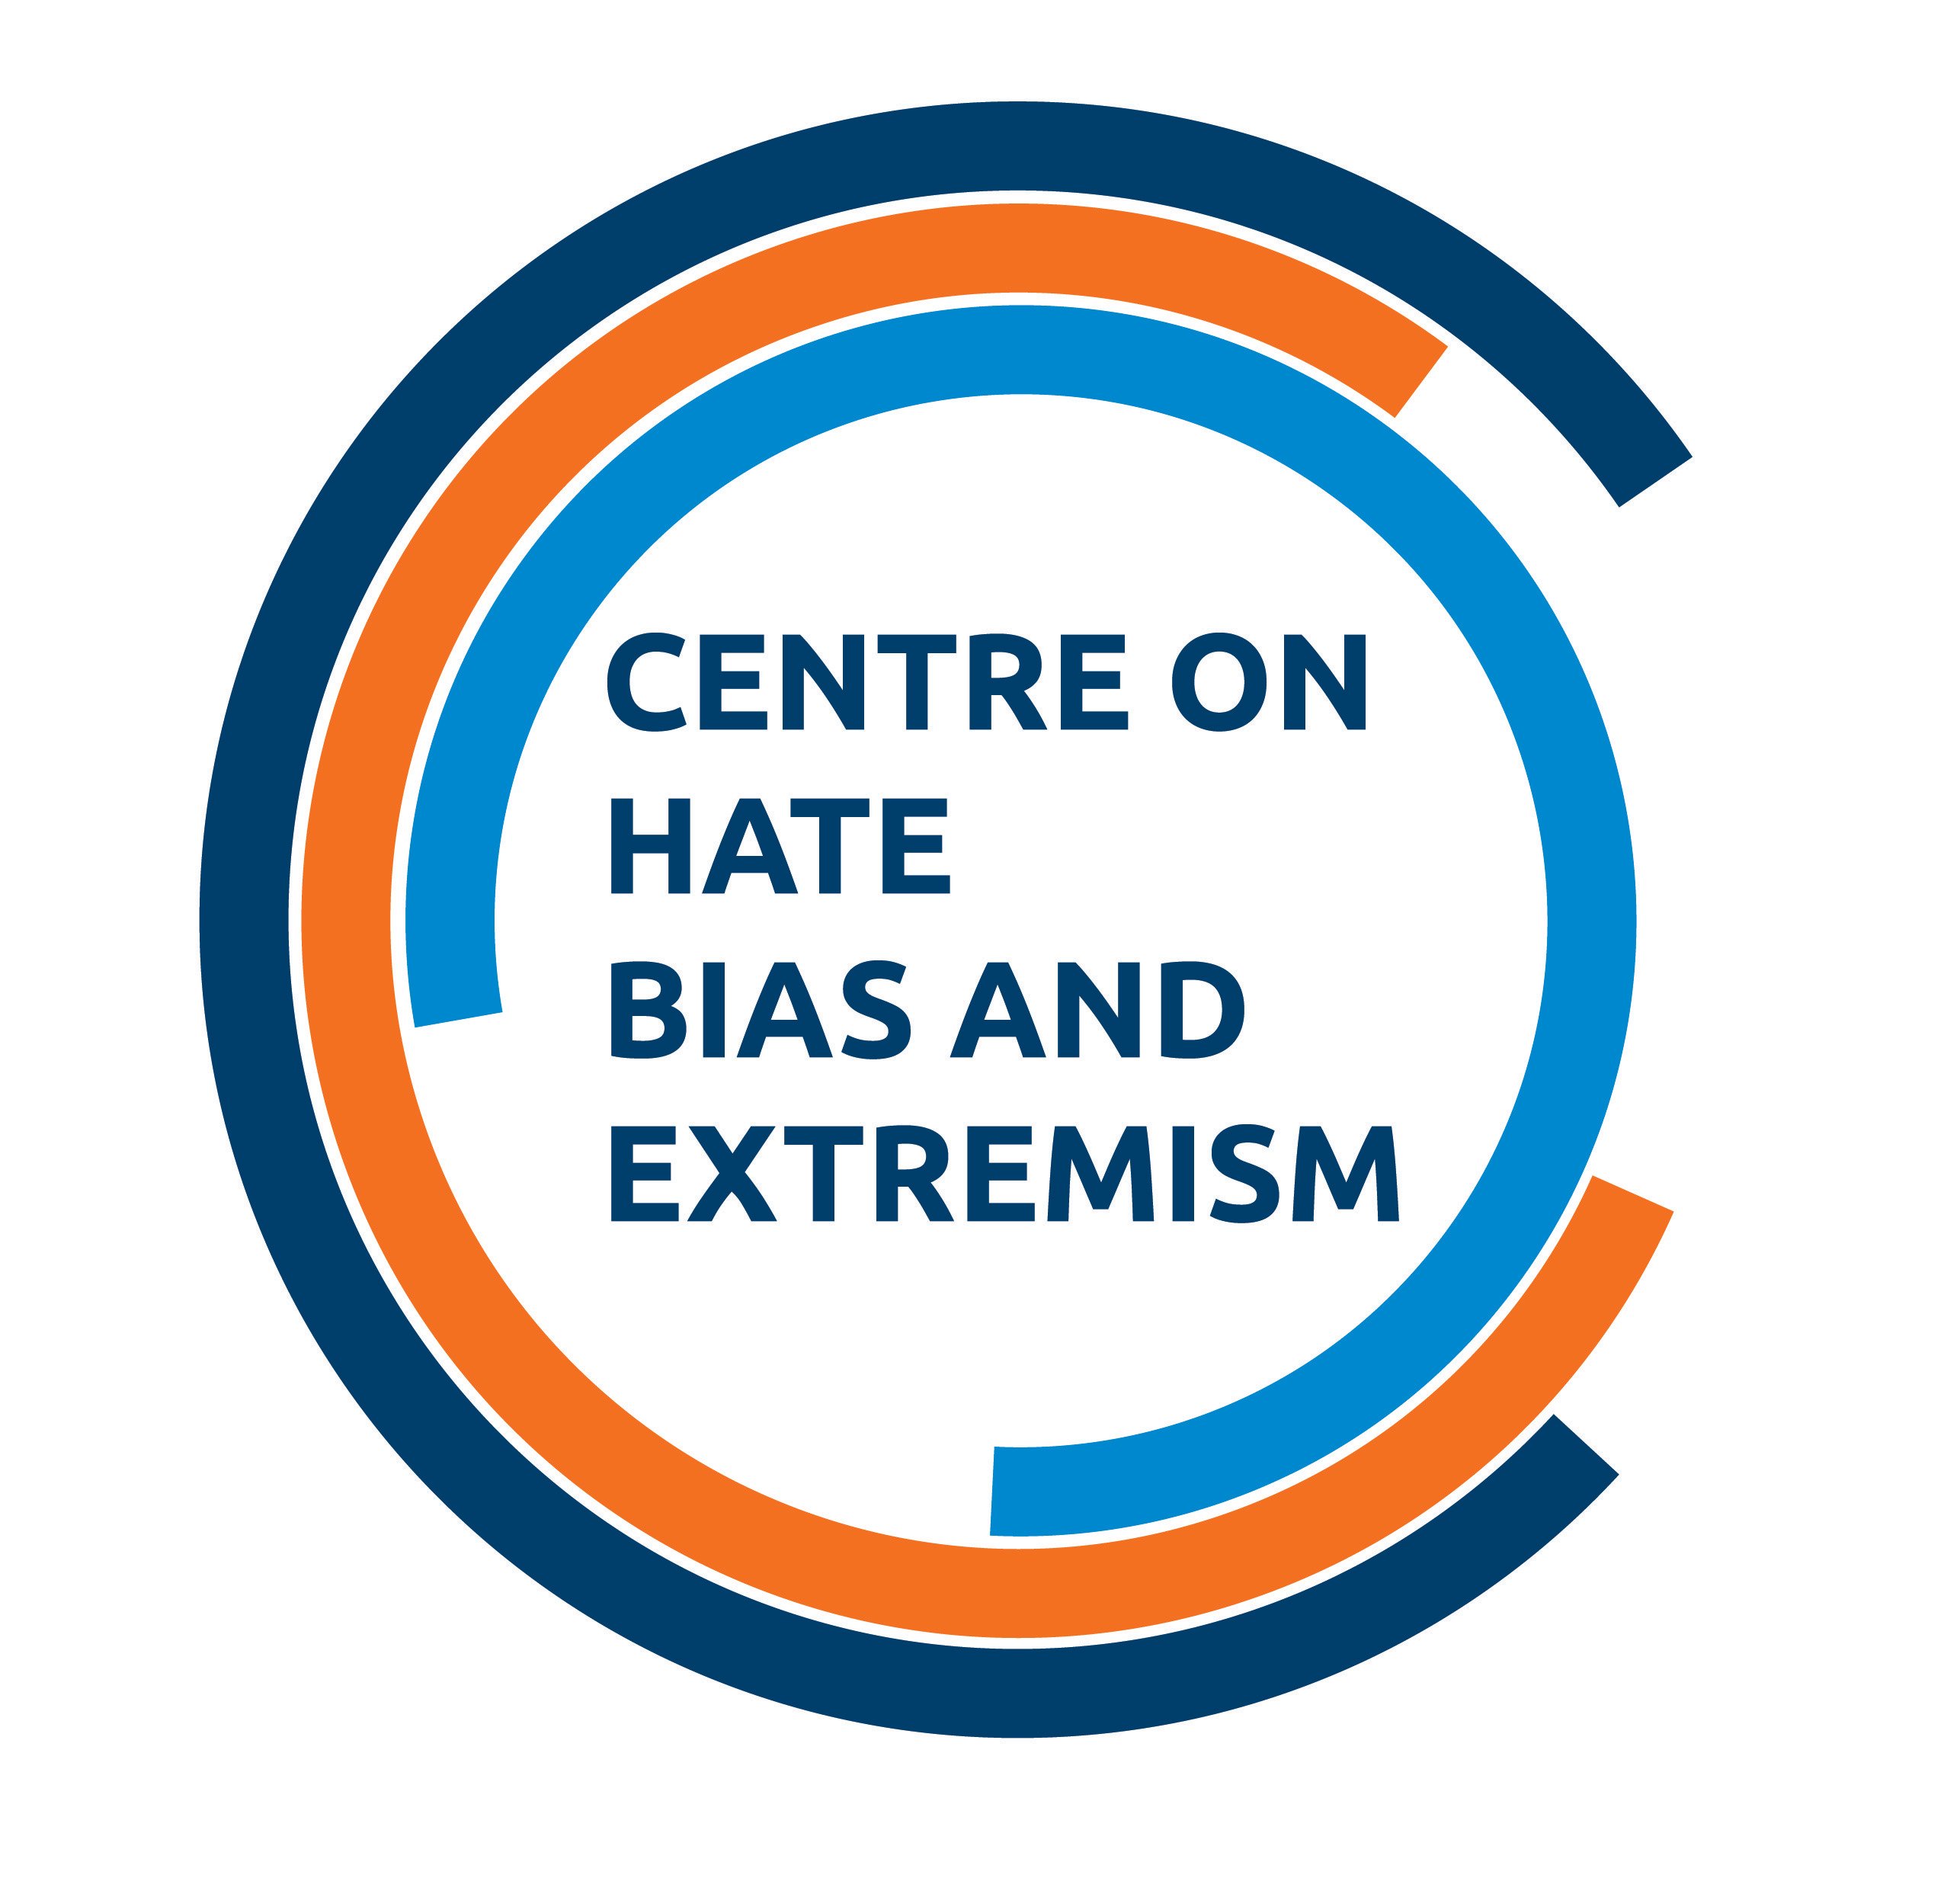 The CHBE assembles researchers at Ontario Tech University to research and counter hate, bias and extremism in order to promote an inclusive society.